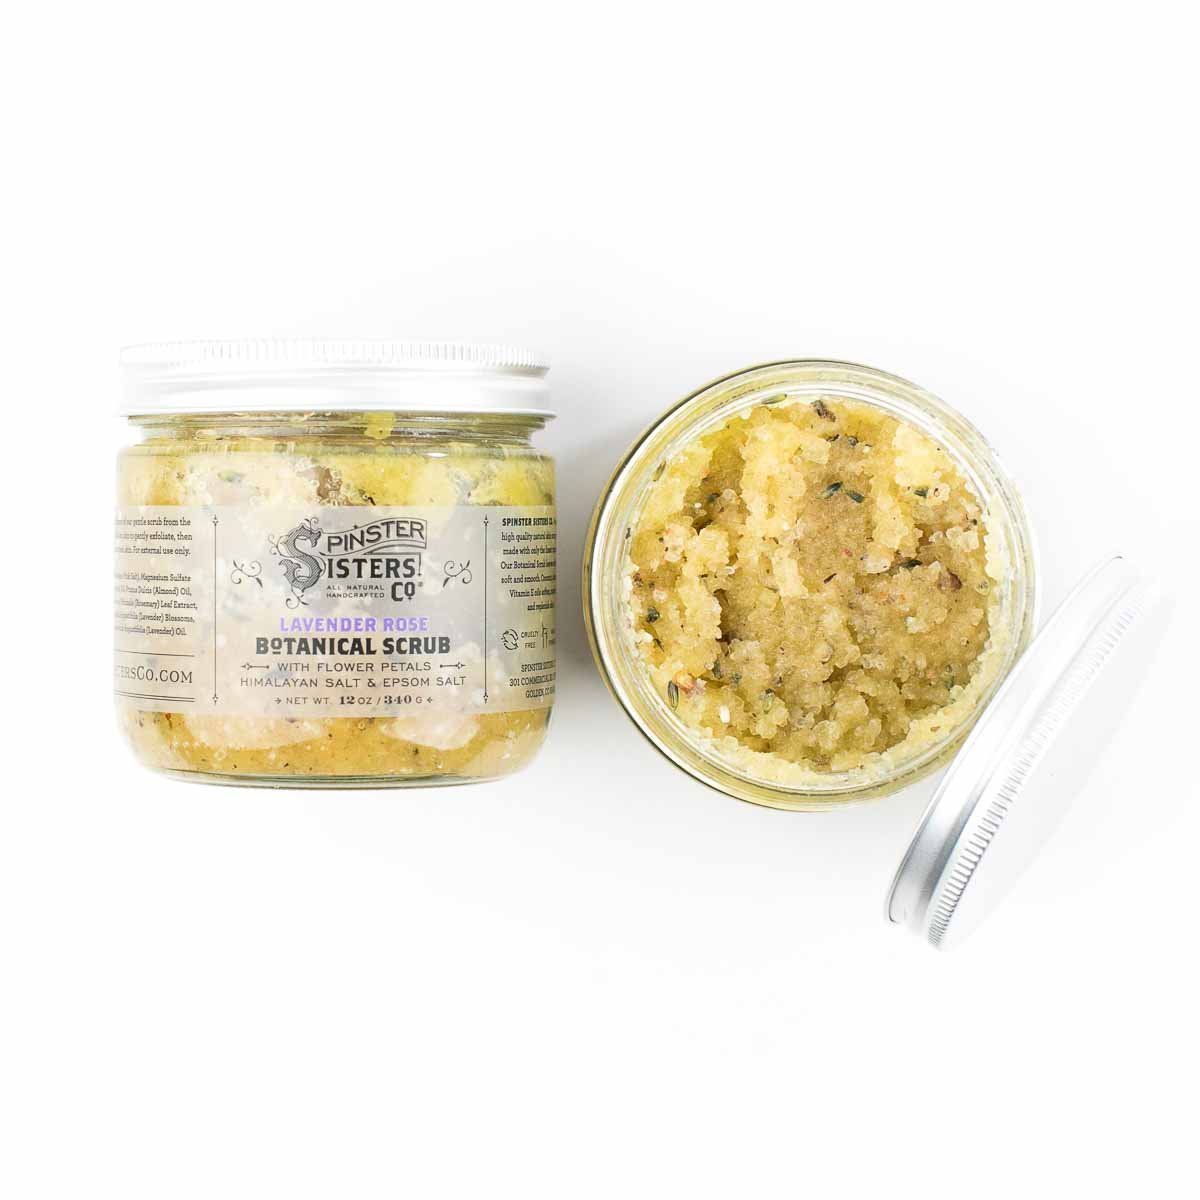 A jar of Spinster Sisters Lavender Rose Botanical Scrub alongside an open container of the moisturizing scrub with a small scoop, displayed on a white background.